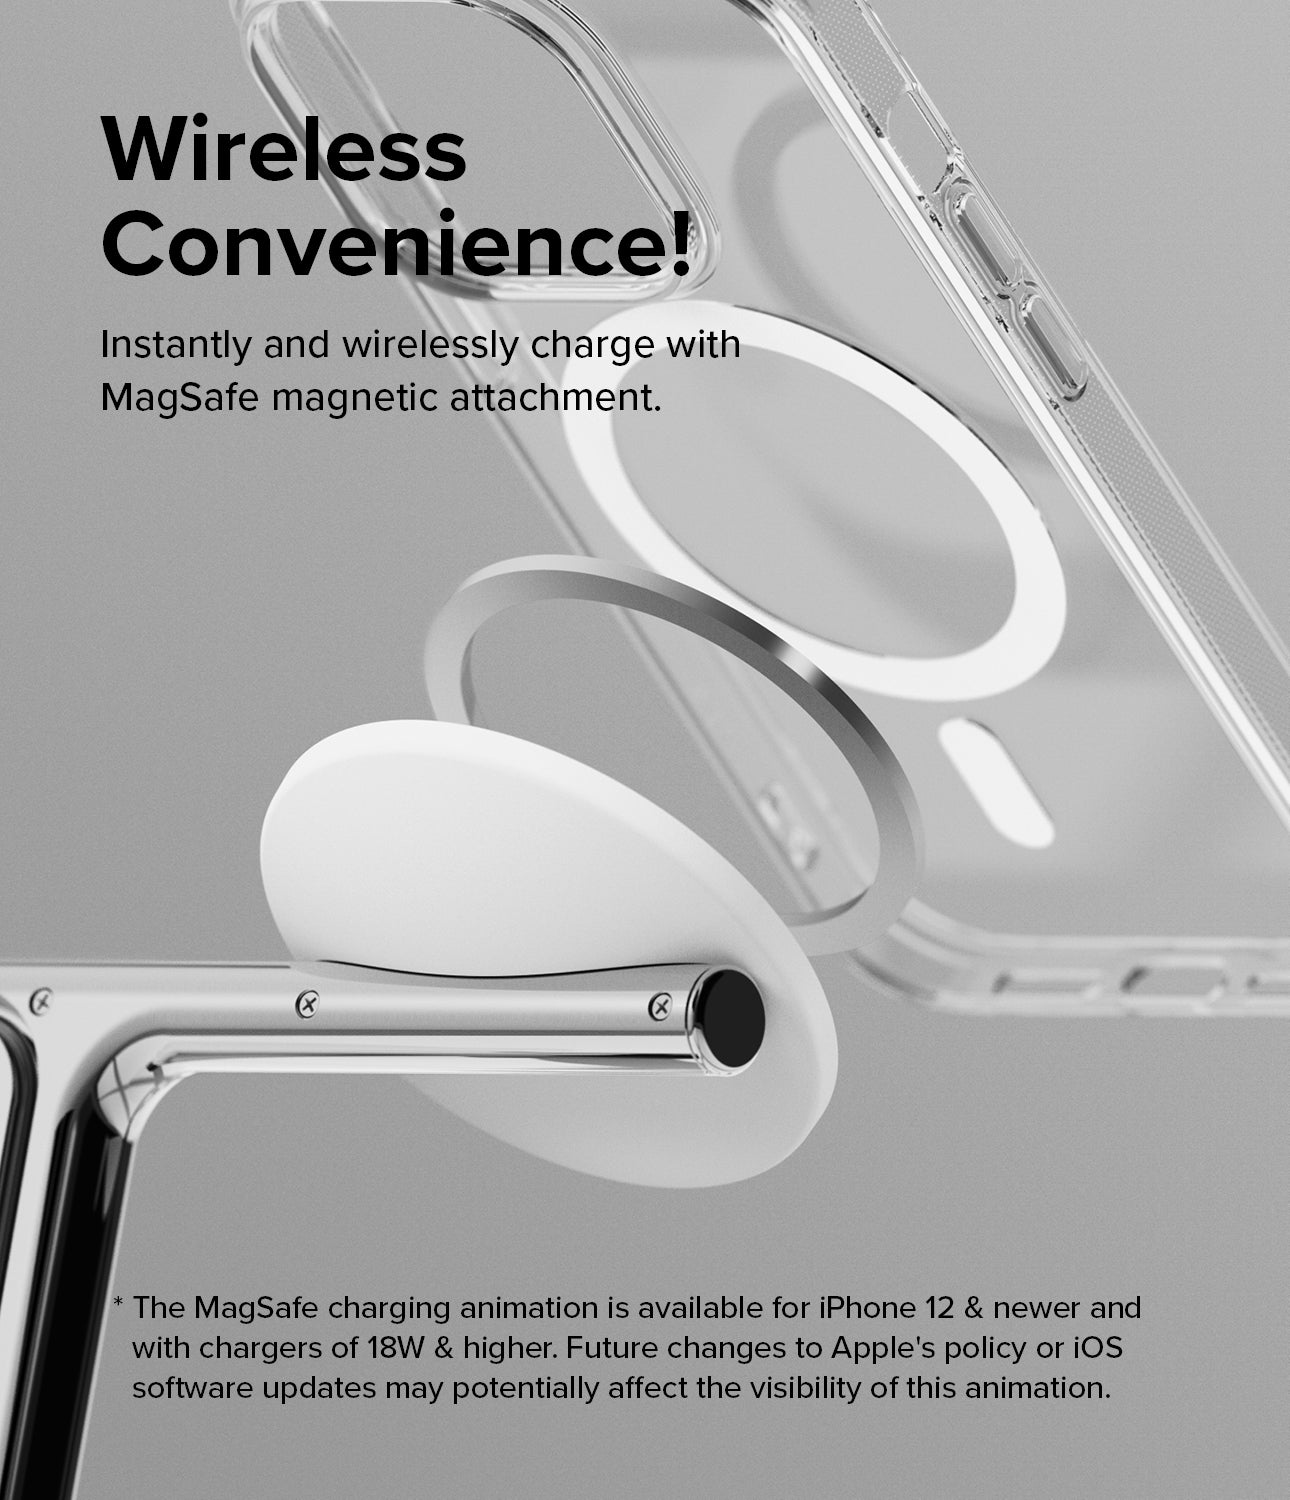 Ringke 3-in-1 Wireless Charger Stand - Wireless Convenience! Instantly and wirelessly charge with MagSafe magnetic attachment. The MagSafe charging animation is available for iPhone 12 and newer and with chargers of 18W and higher. Future changes to Apple's policy or IOS software updates may potentially affect the visibility of this animation.